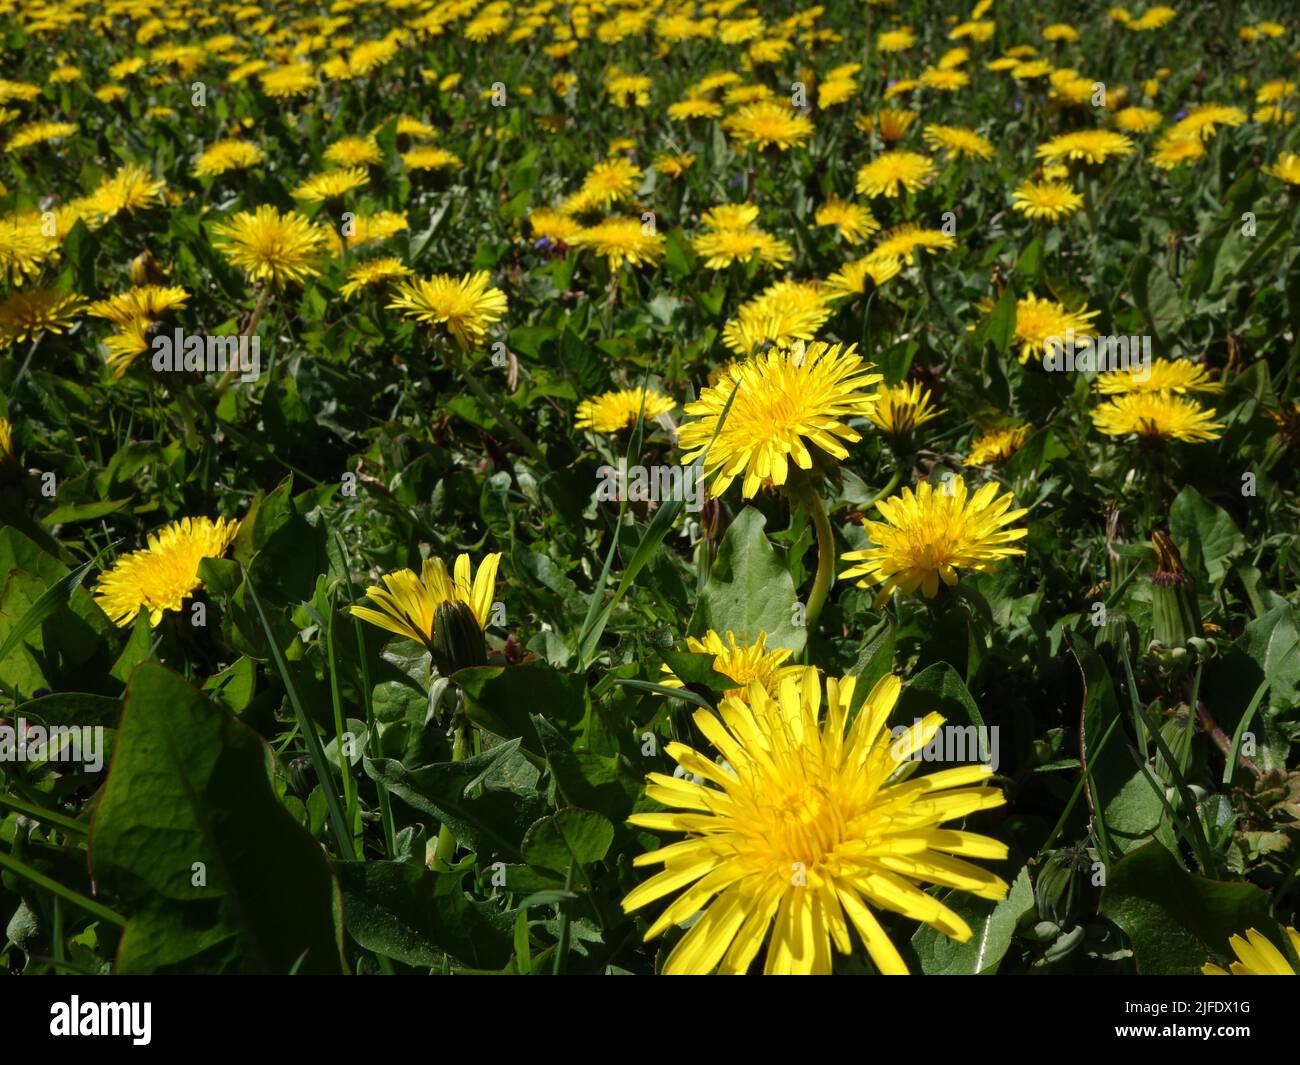 A meadow with dandelions, where you can dream away from the hustle and bustle. Stock Photo